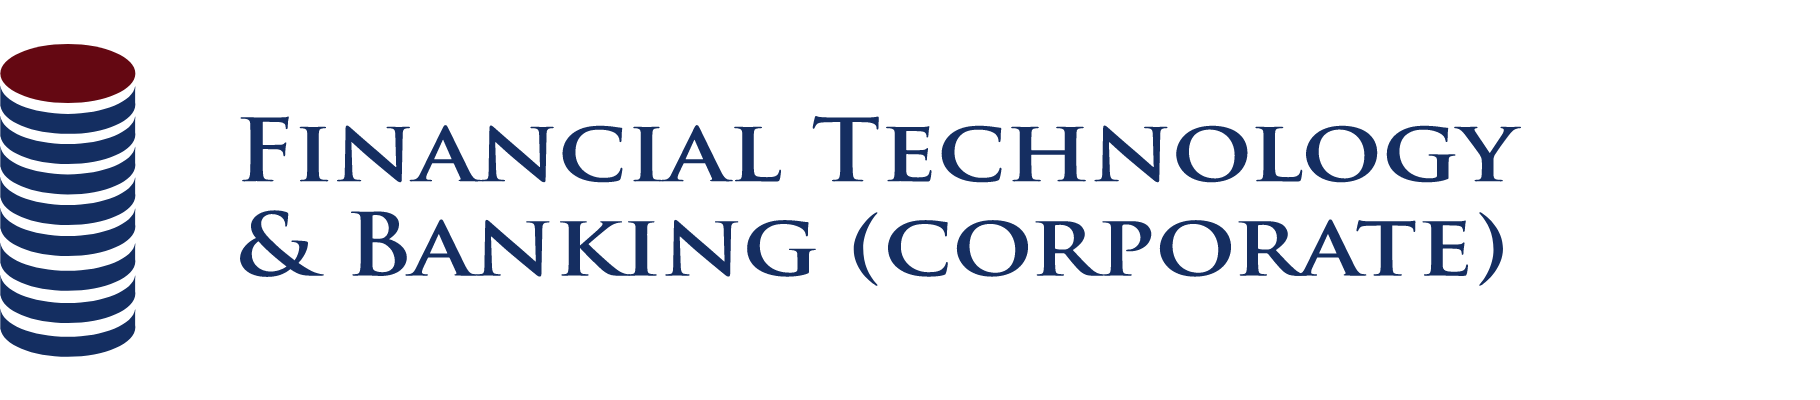 Practice Icon Text 11 Financial Technology Banking Corporate min